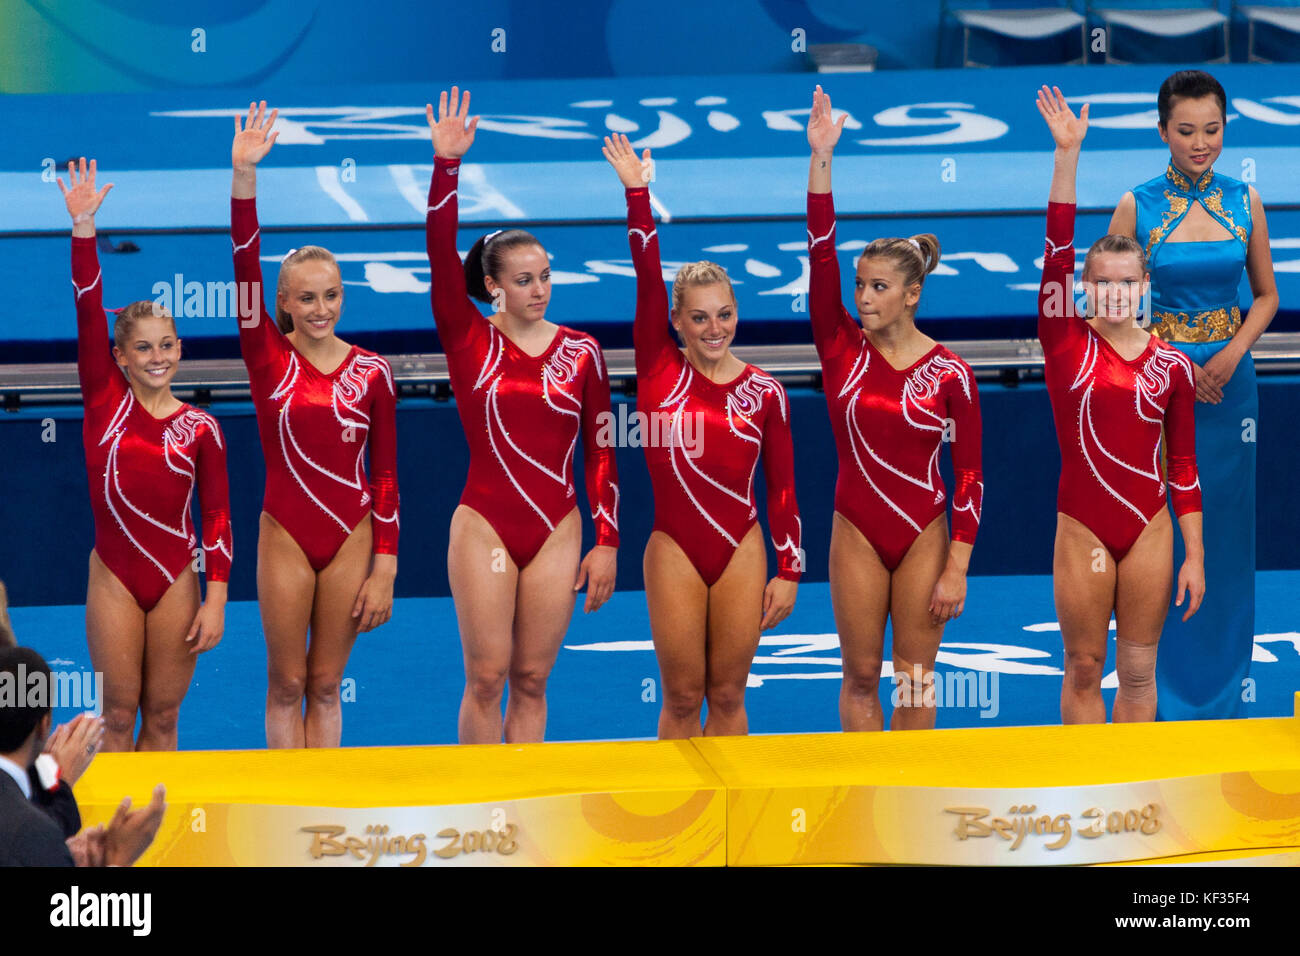 Team USA silver medal winners in the Women Artistic Gymnastic Team Event at the 2008 Olympic Summer Games, Beijing, China Stock Photo